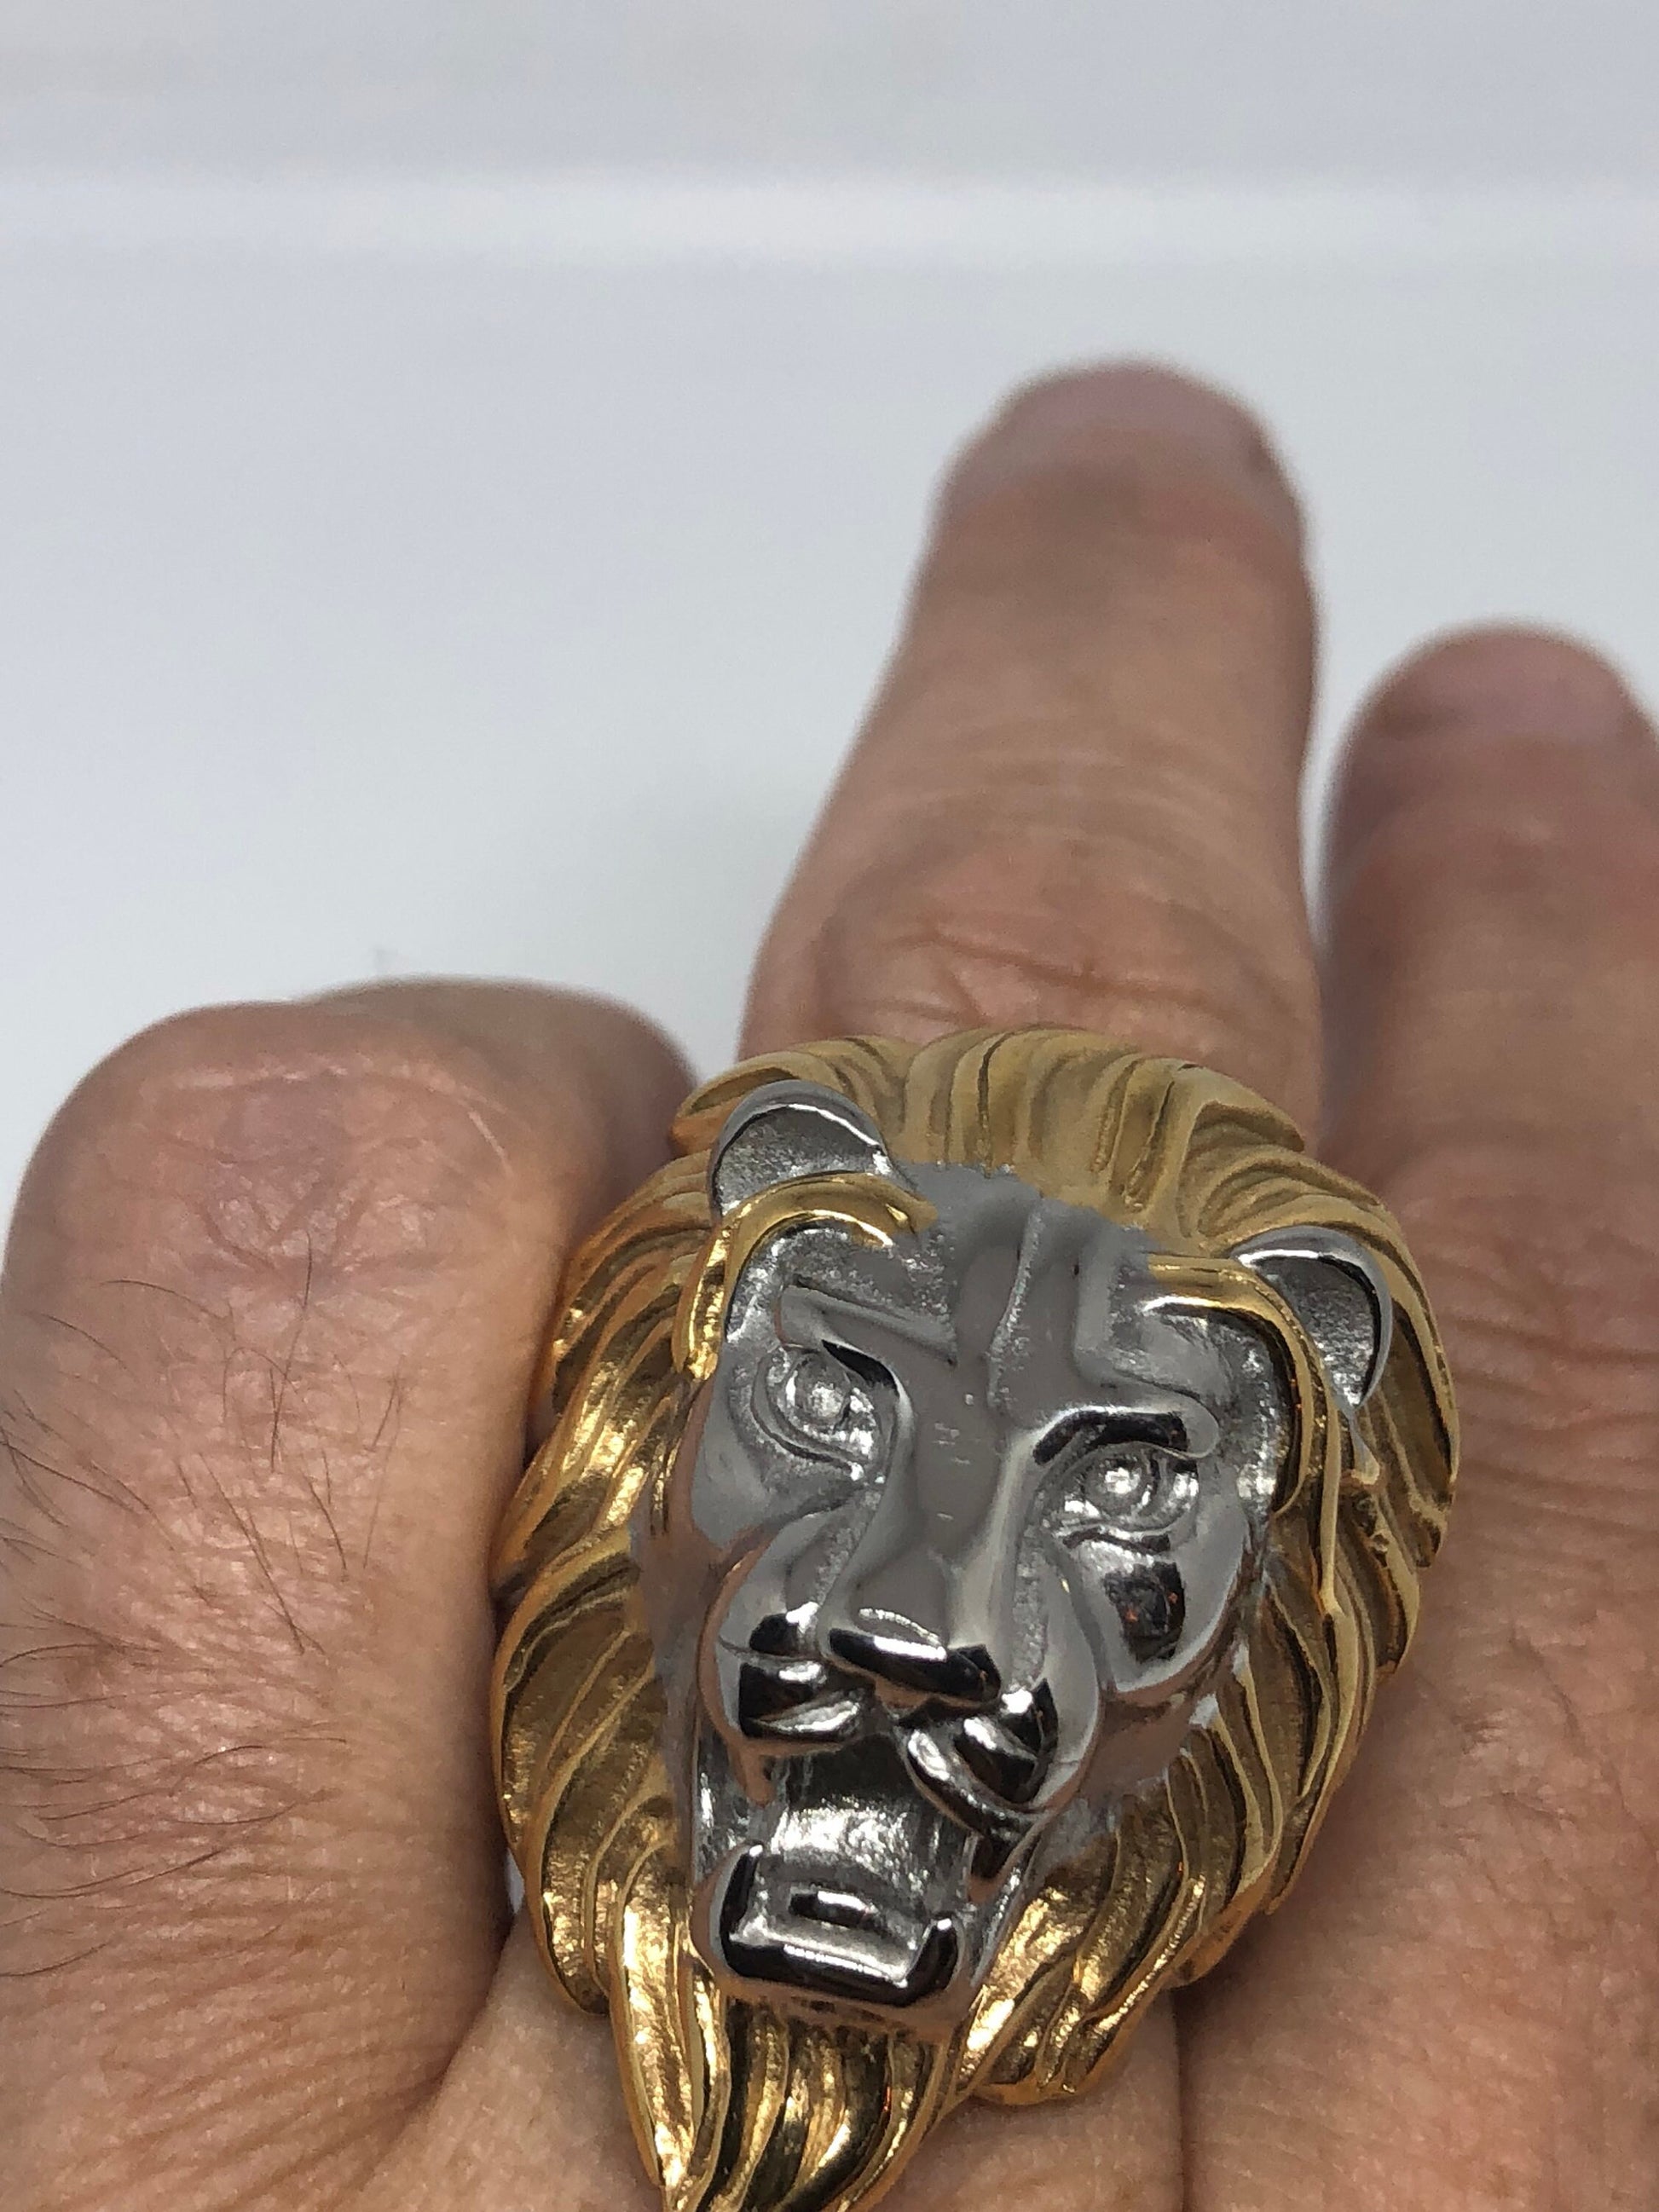 Vintage Gothic Silver Gold Stainless Steel Lion Head Mens Ring